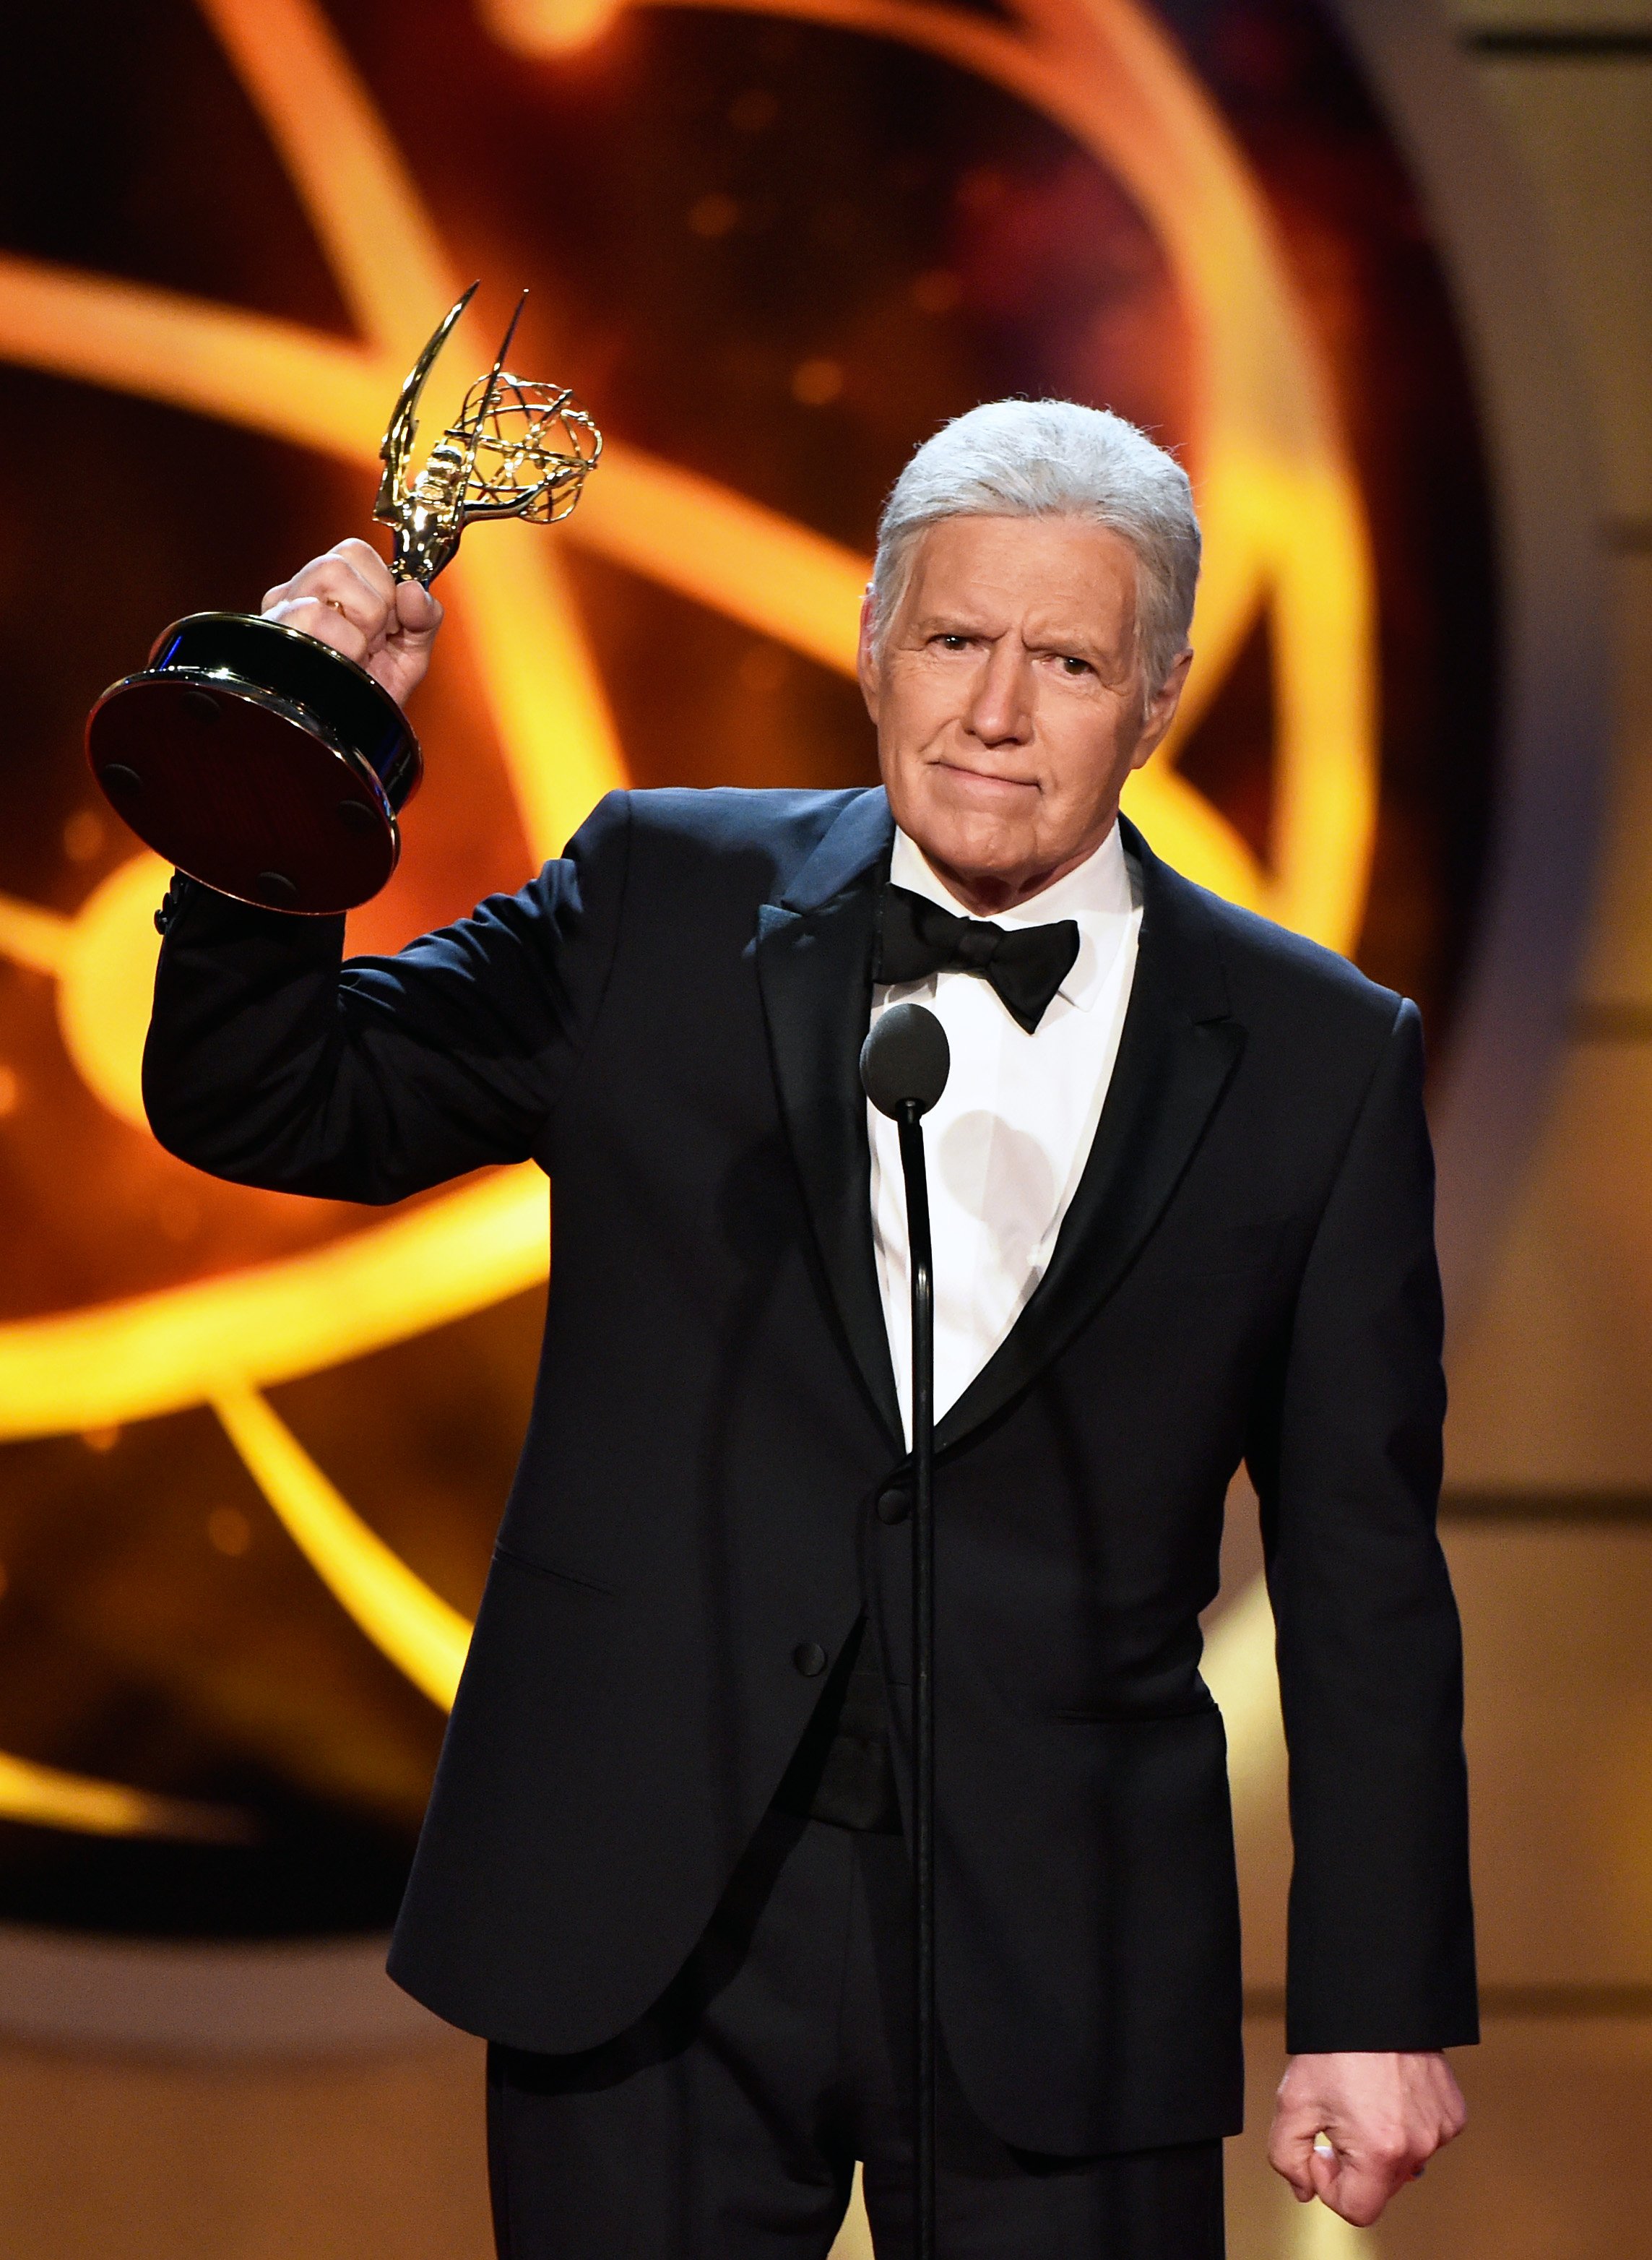 "Jeopardy!" host Alex Trebek wins an award for Outstanding Game Show Host at the 46th Annual Daytime Emmy Awards | Photo: Getty Images